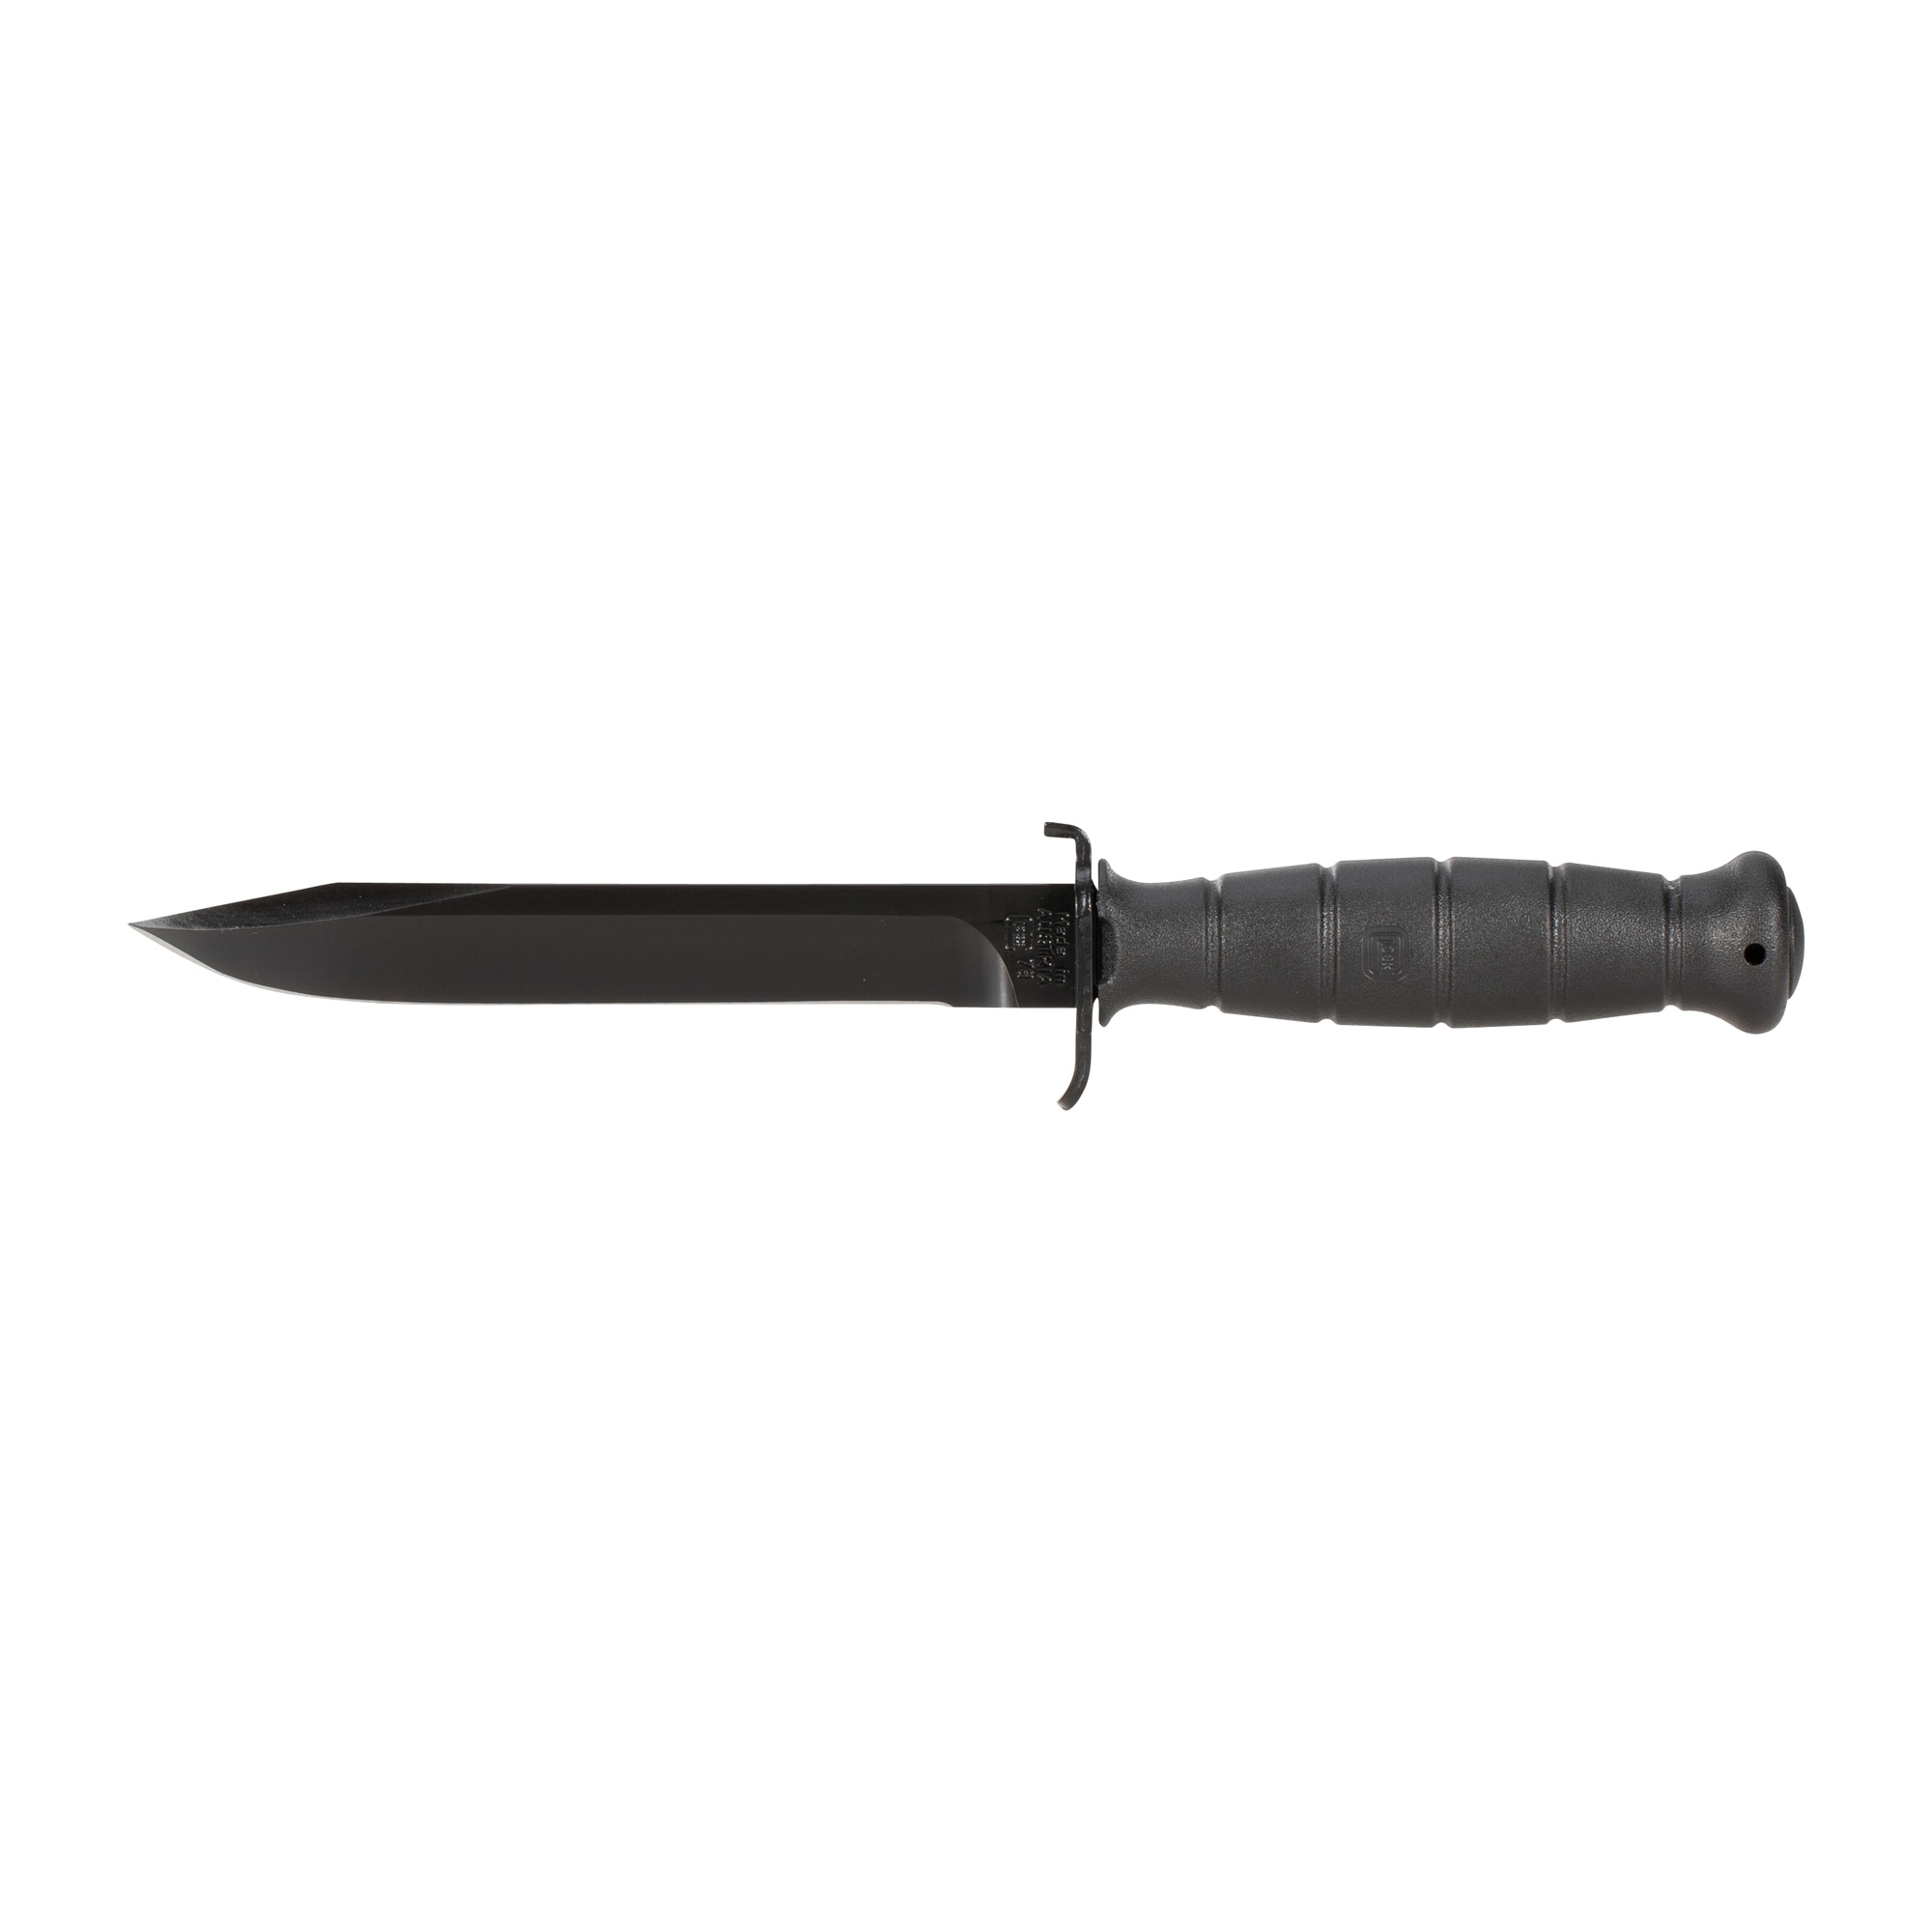 Purchase the Glock Combat Knife black by ASMC